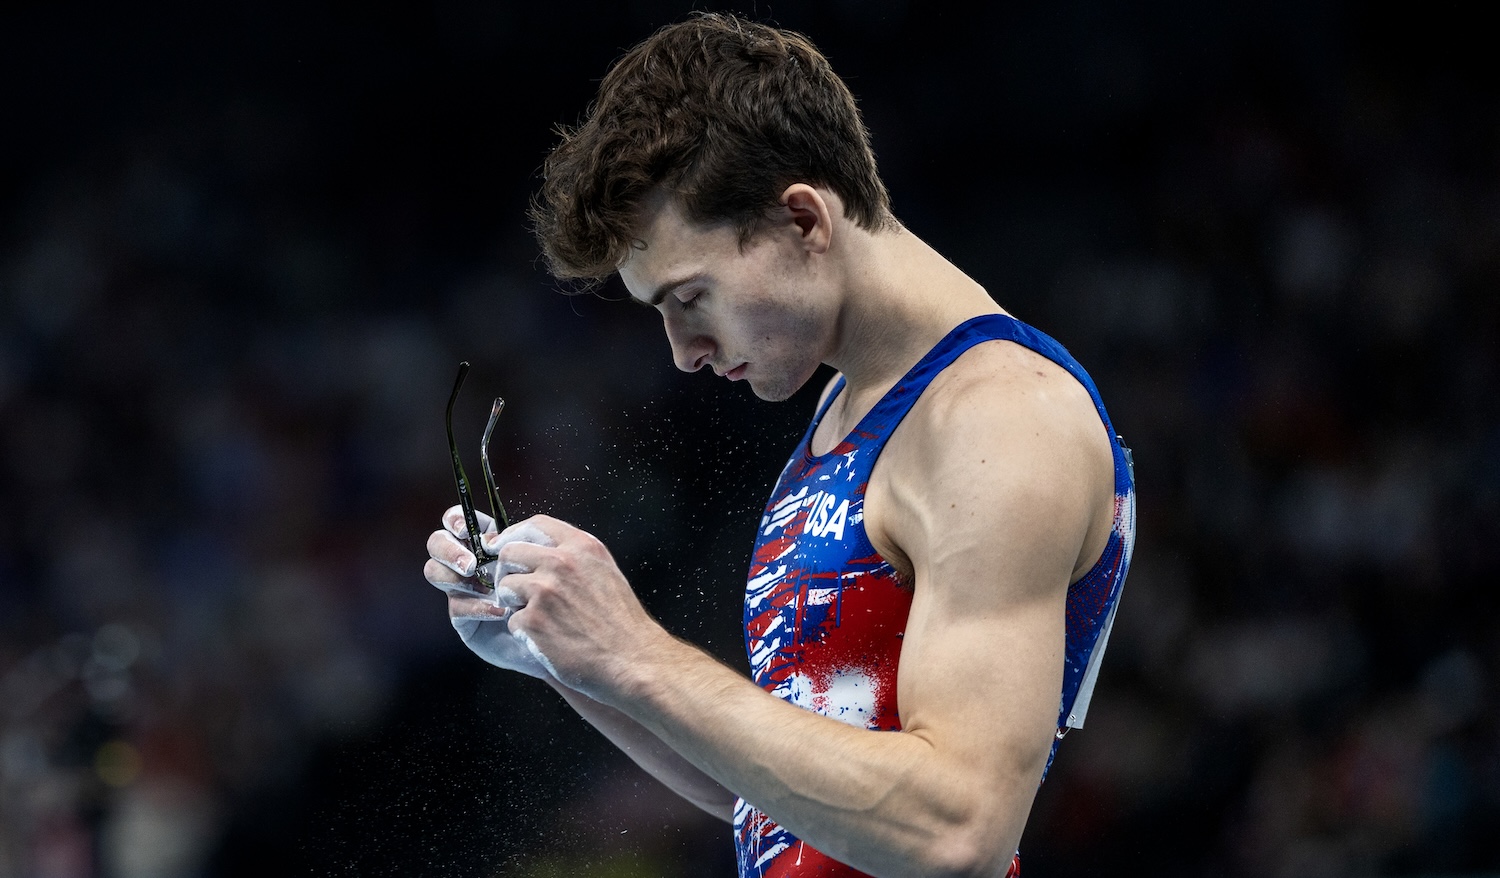 PARIS, FRANCE: JULY 27: Stephen Nedoroscik of the United States prepares to perform his pommel horse routine during Artistic Gymnastics, Men's Qualification at the Bercy Arena during the Paris 2024 Summer Olympic Games on July 27th, 2024 in Paris, France. (Photo by Tim Clayton/Corbis via Getty Images)